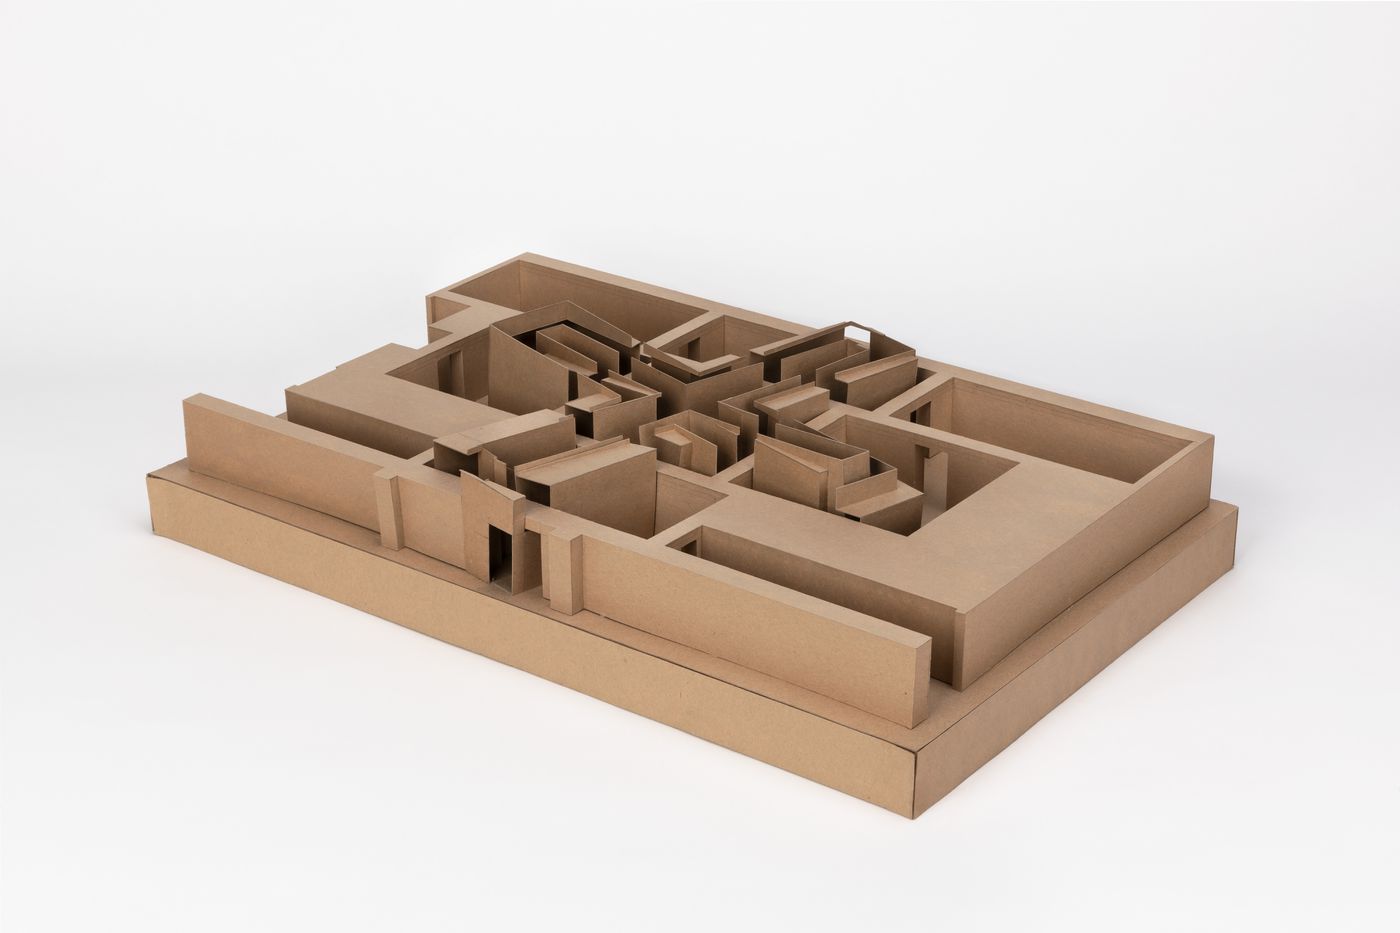 Study model for the installation "Cities of Artificial Excavation"